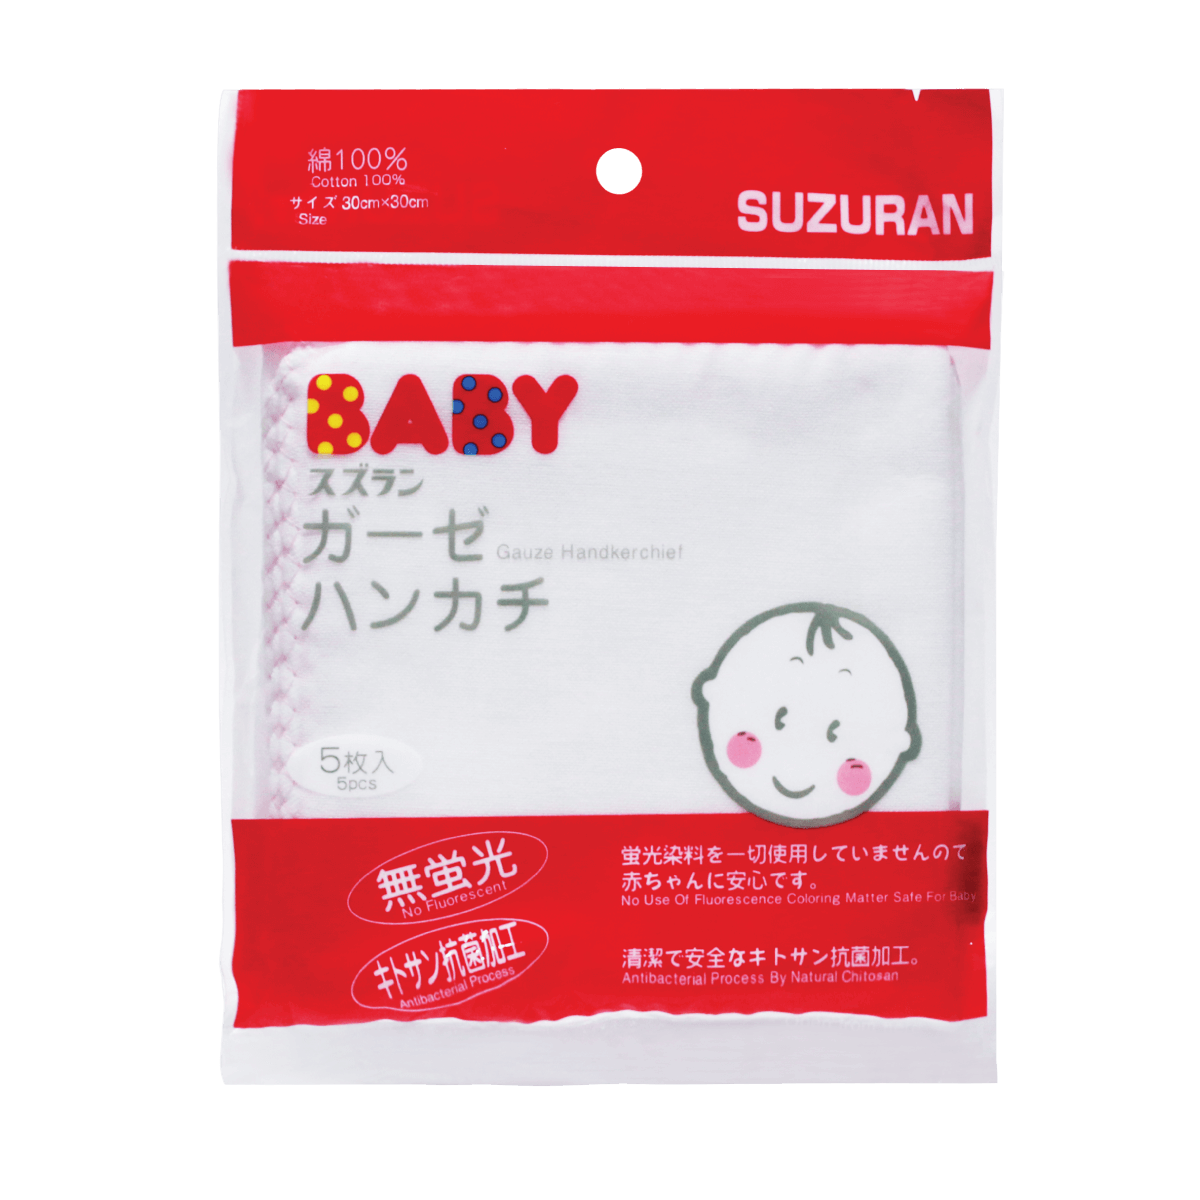 Suzuran Baby Highly Absorbent & Multipurpose 100% Cotton Gauze Handkerchiefs (Choose In Either Pack of 5 Pieces / 10 Pieces)